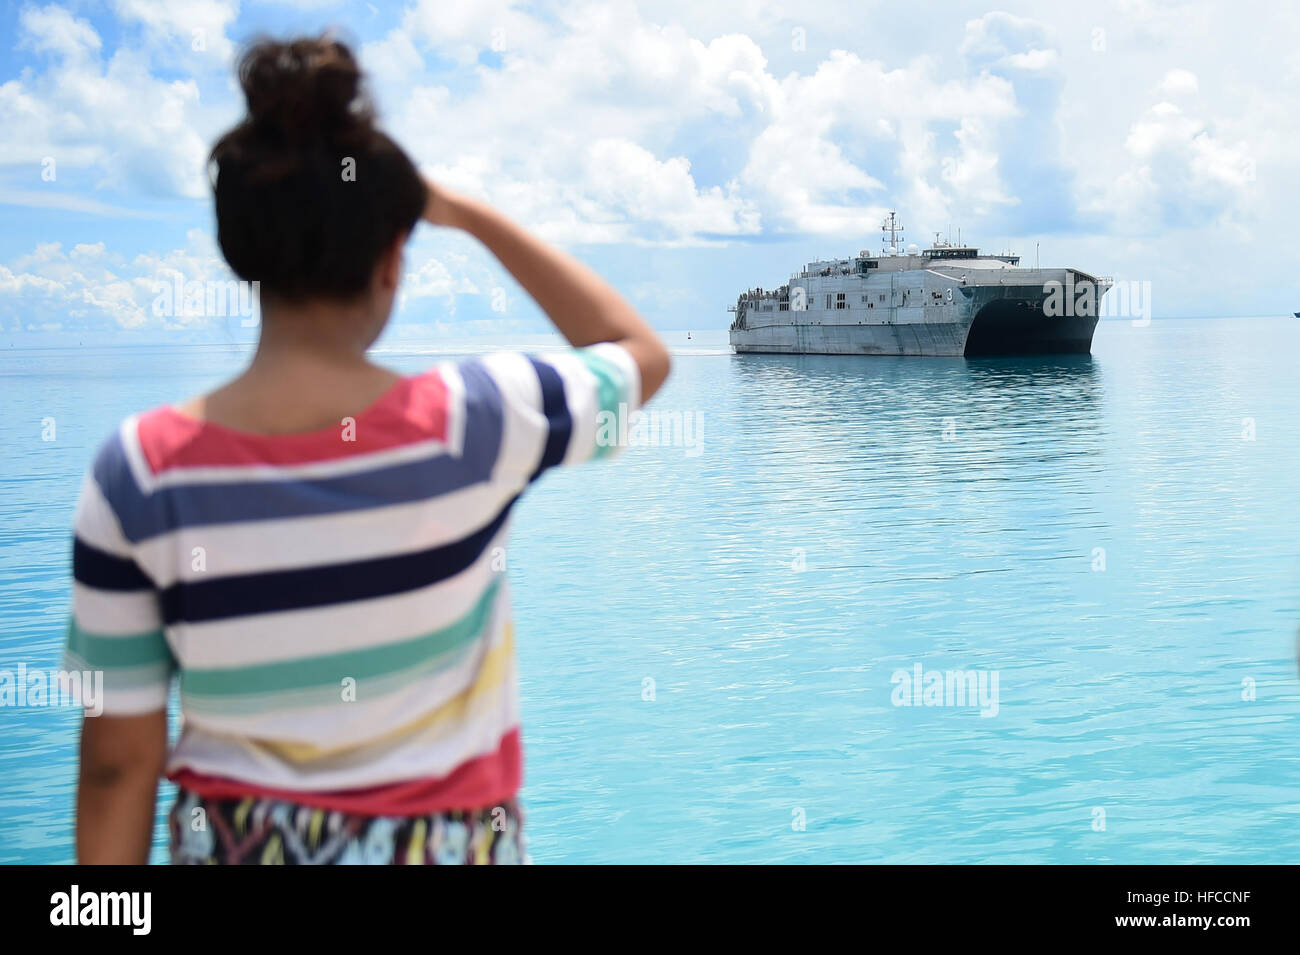 150602-N-HY254-017 TARAWA, Kiribati (June 2, 2015) An I-Kiribati girl watches as the Military Sealift Command joint high-speed vessel USNS Millinocket (JHSV 3) arrives in Tarawa, Republic of Kiribati in support of Pacific Partnership 2015.  Tarawa is an atoll and the capital of the Republic of Kiribati, in the central Pacific Ocean and is the first country Millinocket will visit during PP15.  Now in its tenth iteration, Pacific Partnership is the largest annual multilateral humanitarian assistance and disaster relief preparedness mission conducted in the Indio-Asia-Pacific region. While traini Stock Photo